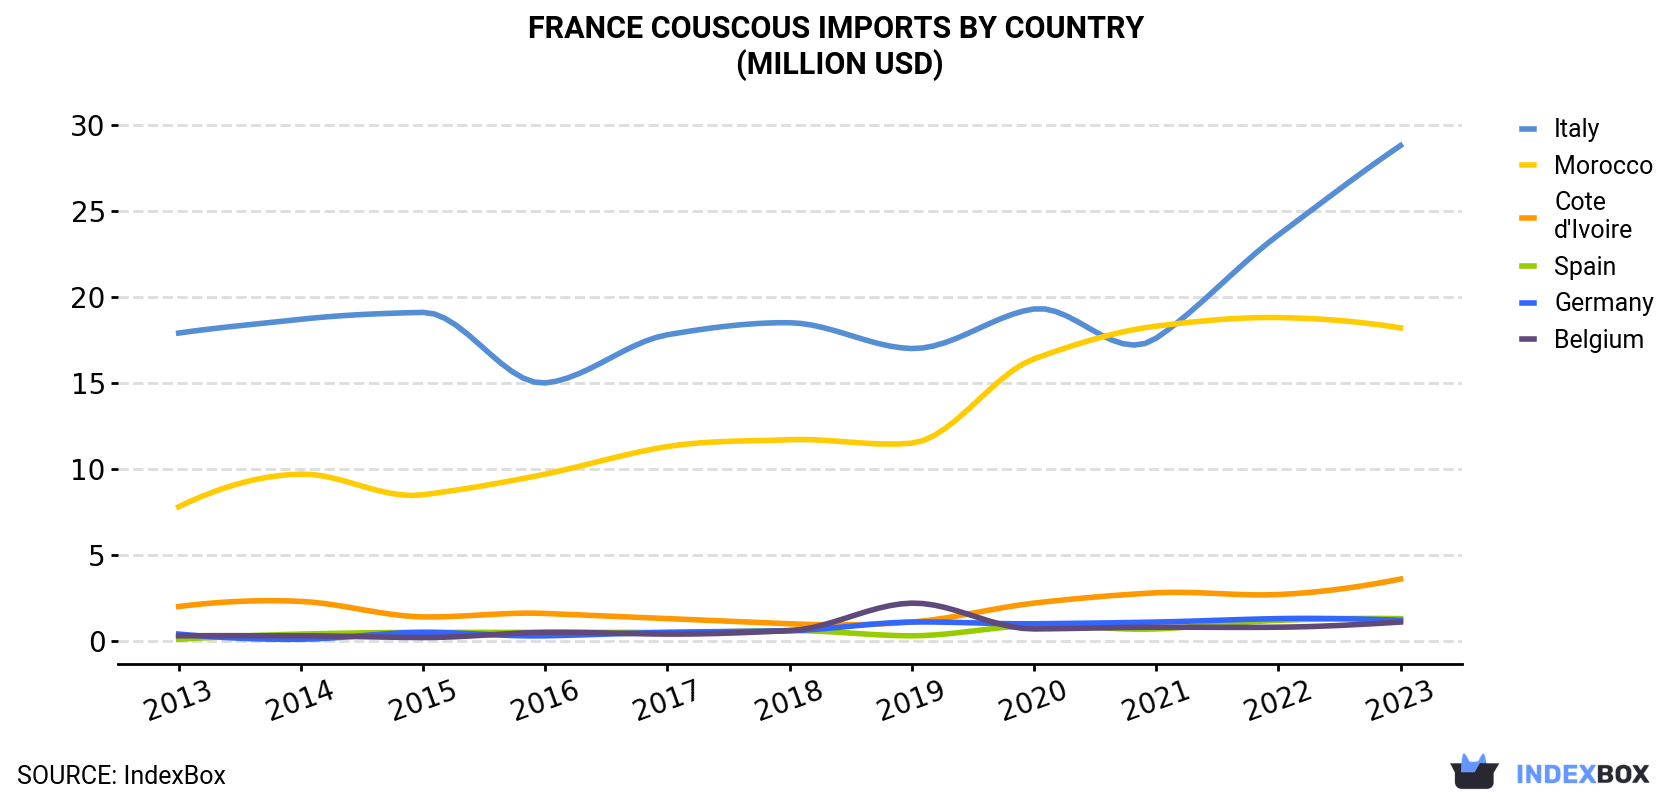 France Couscous Imports By Country (Million USD)